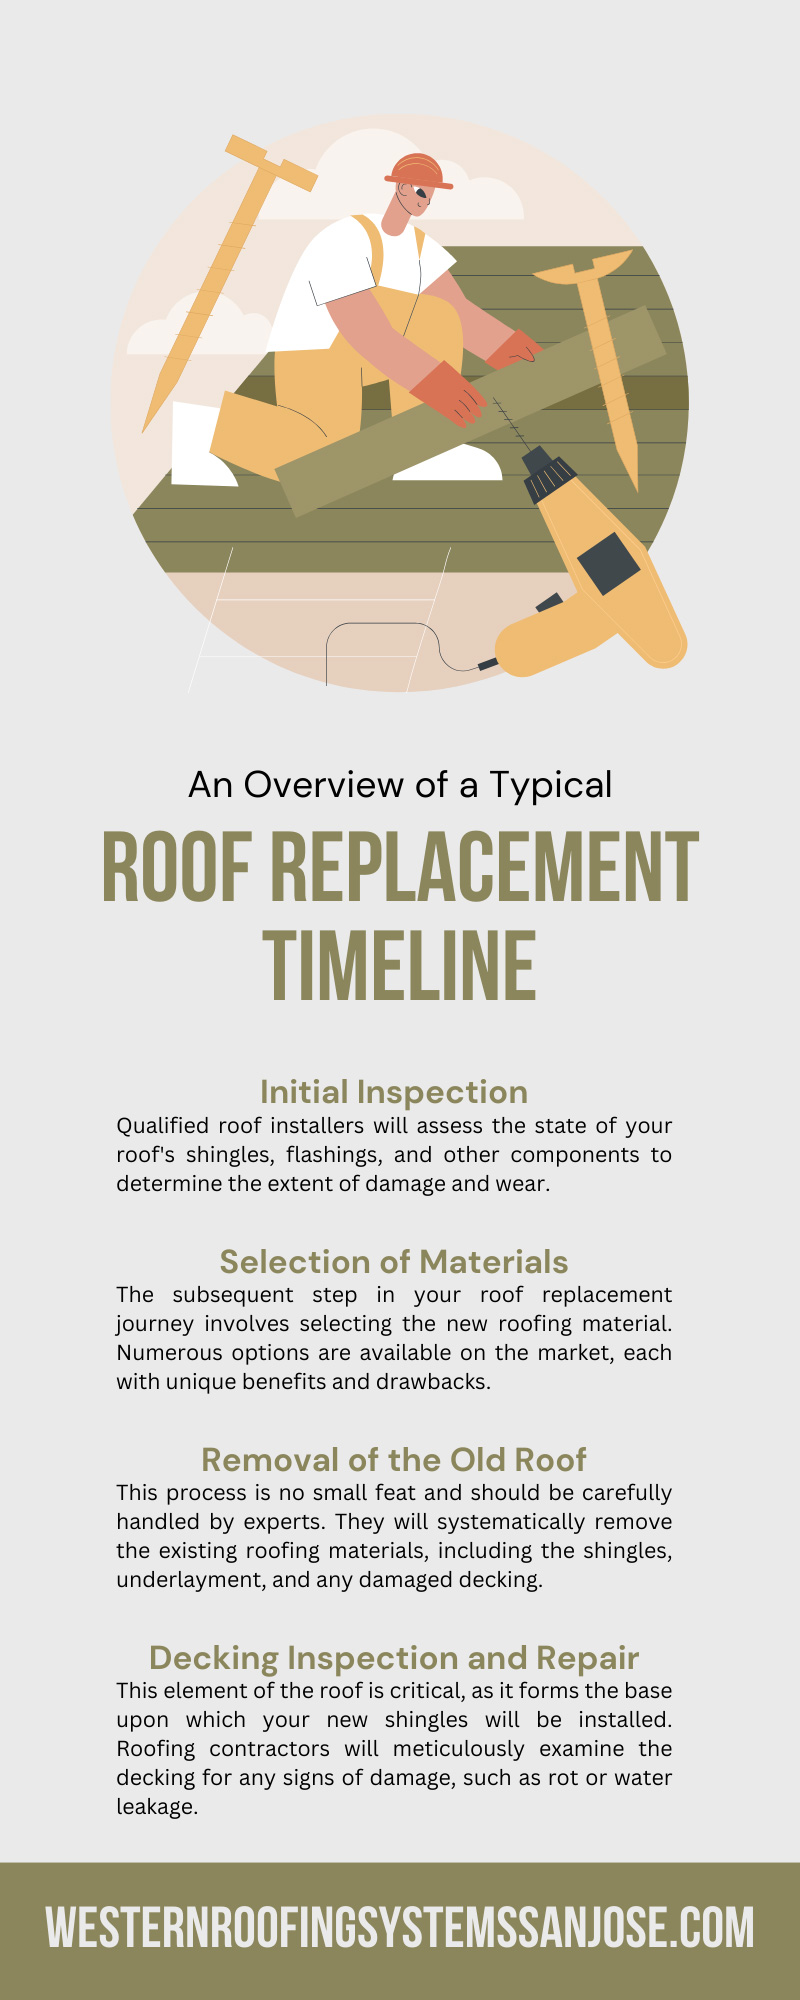 An Overview of a Typical Roof Replacement Timeline